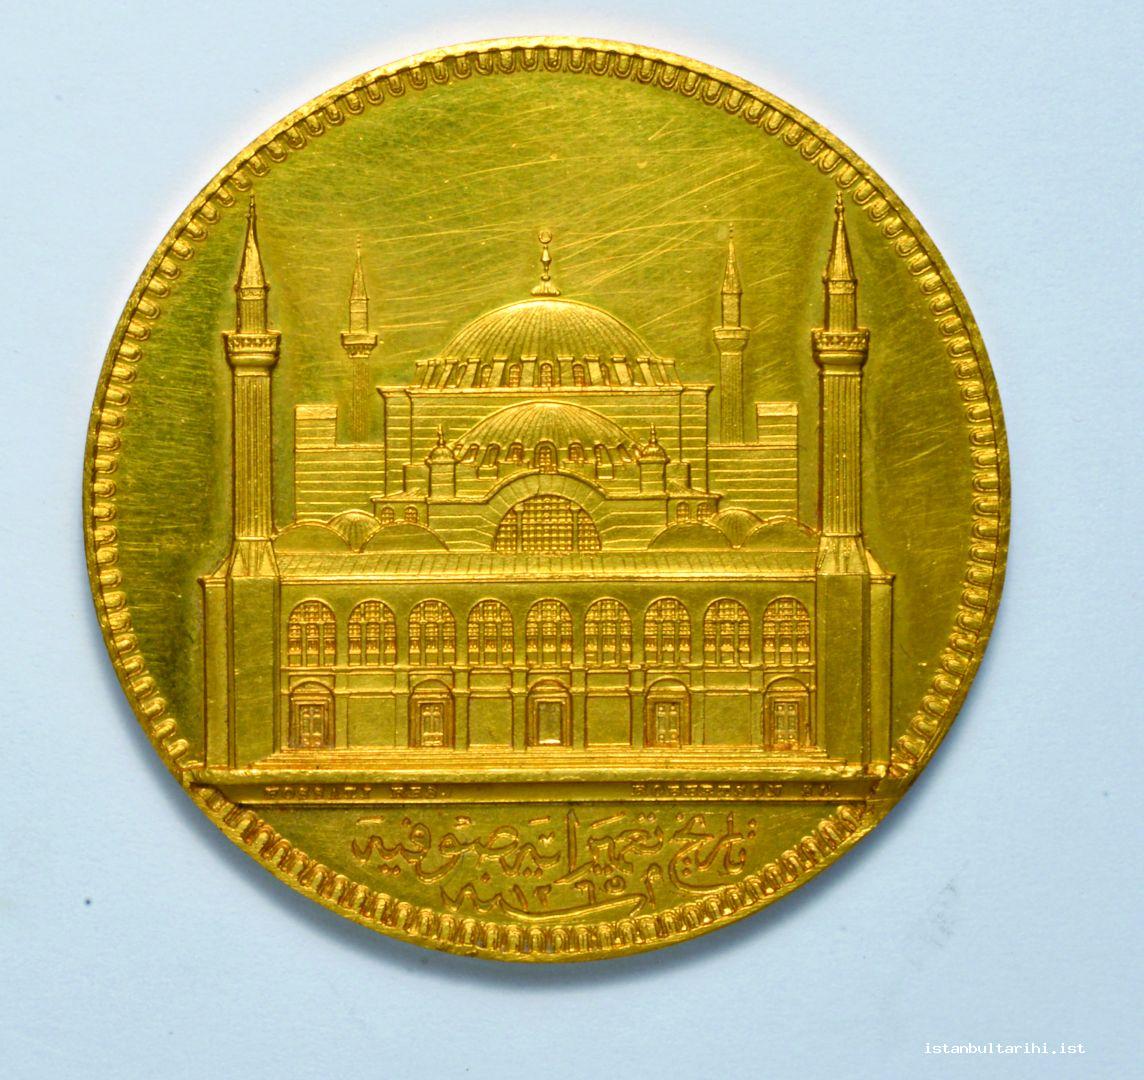 8- The front and back of the medallion minted in honor of Ayasofya (Hagia Sophia) by Sultan Abdülmecid who restored it (Istanbul Archeology Museum, Coins Section)